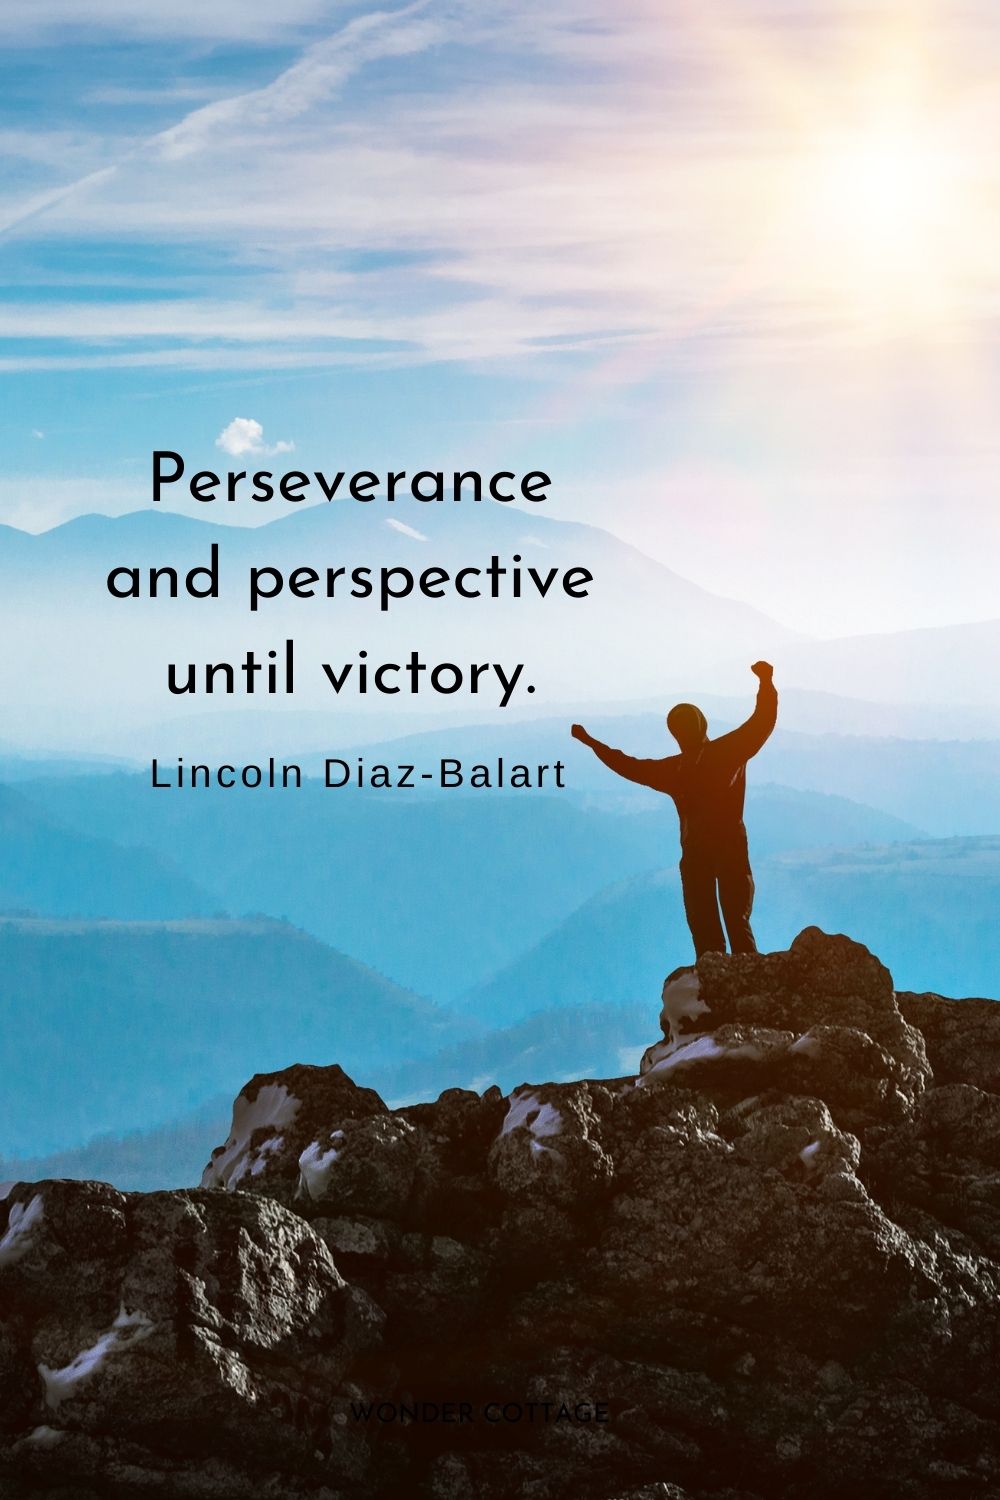 Perseverance and perspective until victory.  Lincoln Diaz-Balart